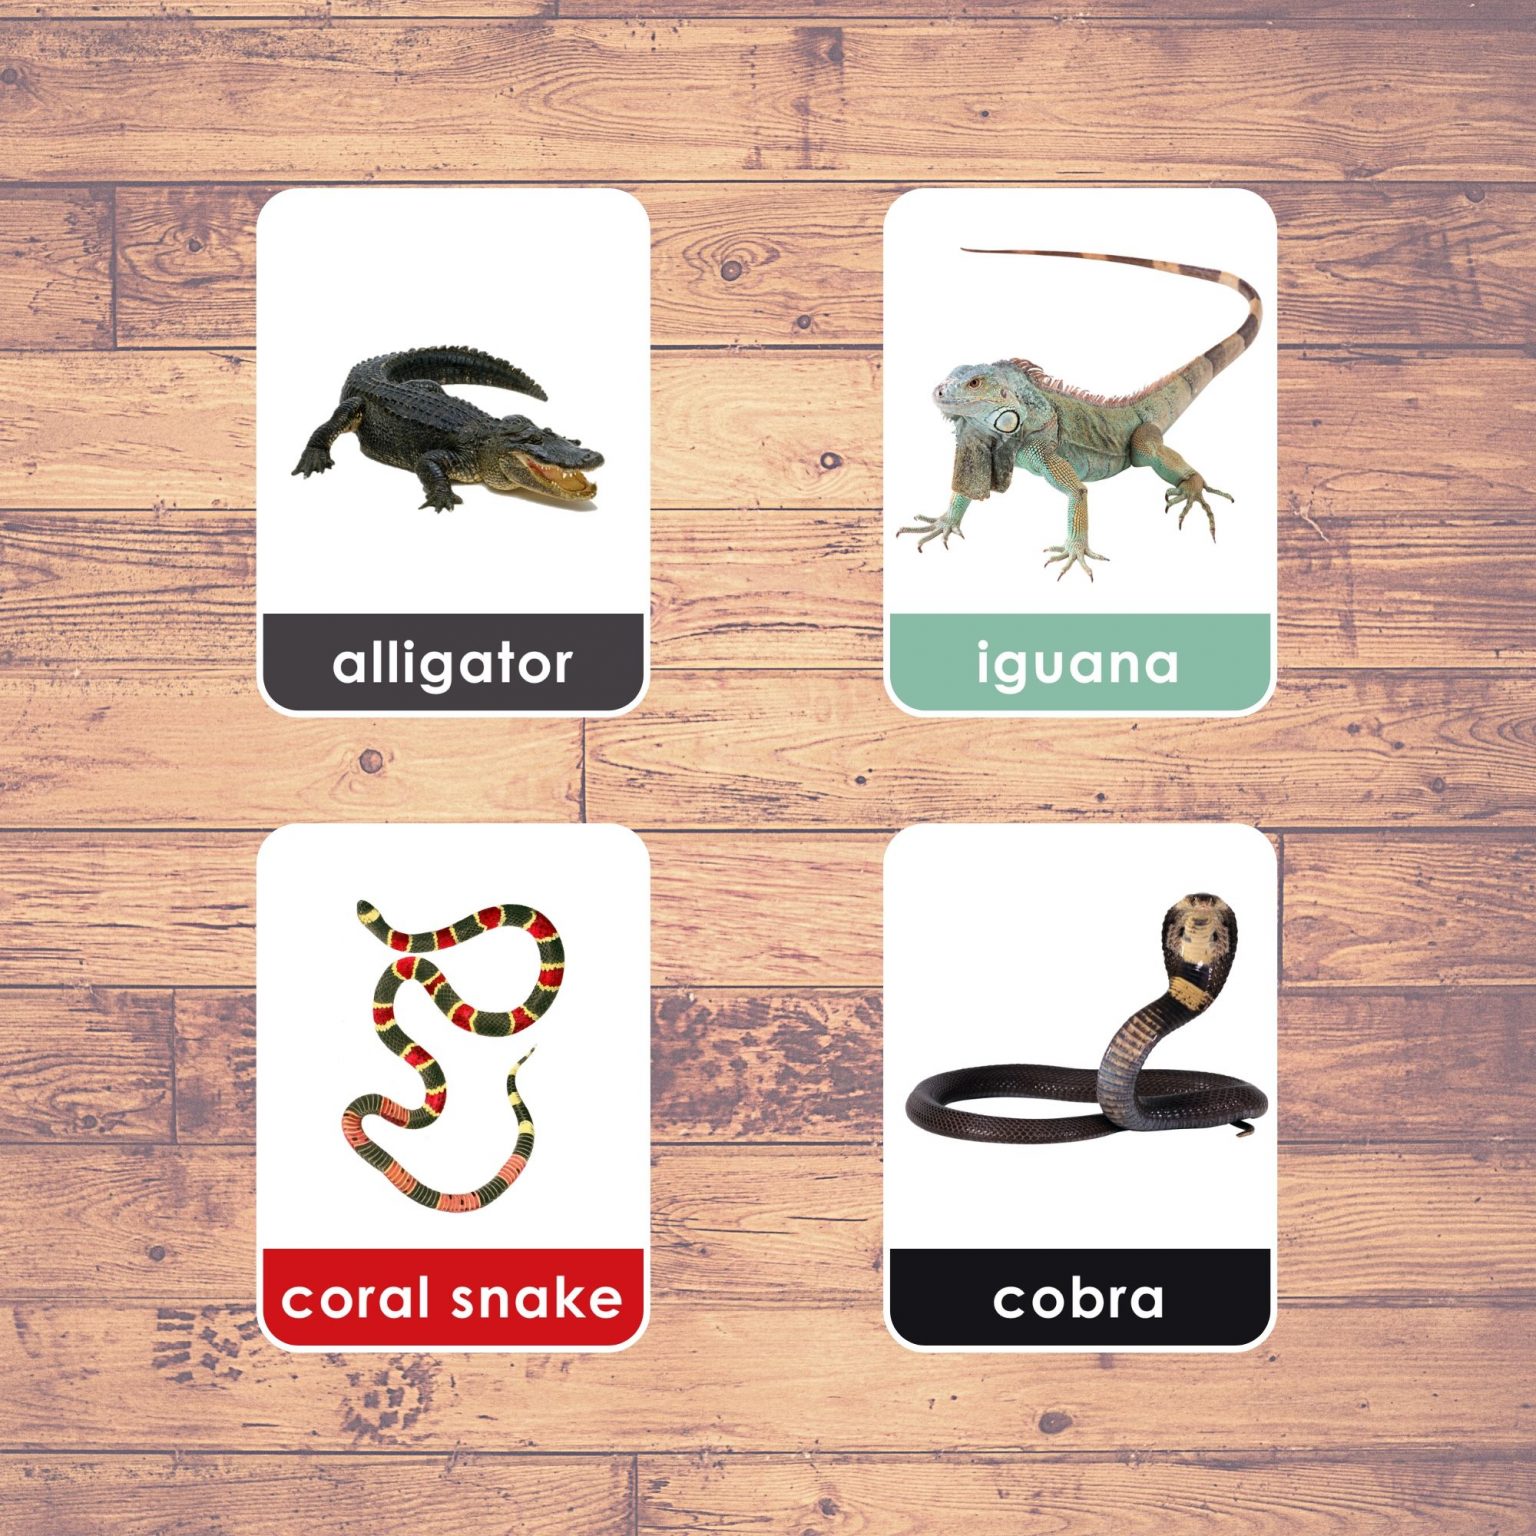 reptiles-flashcards-montessori-educational-learning-20-cards